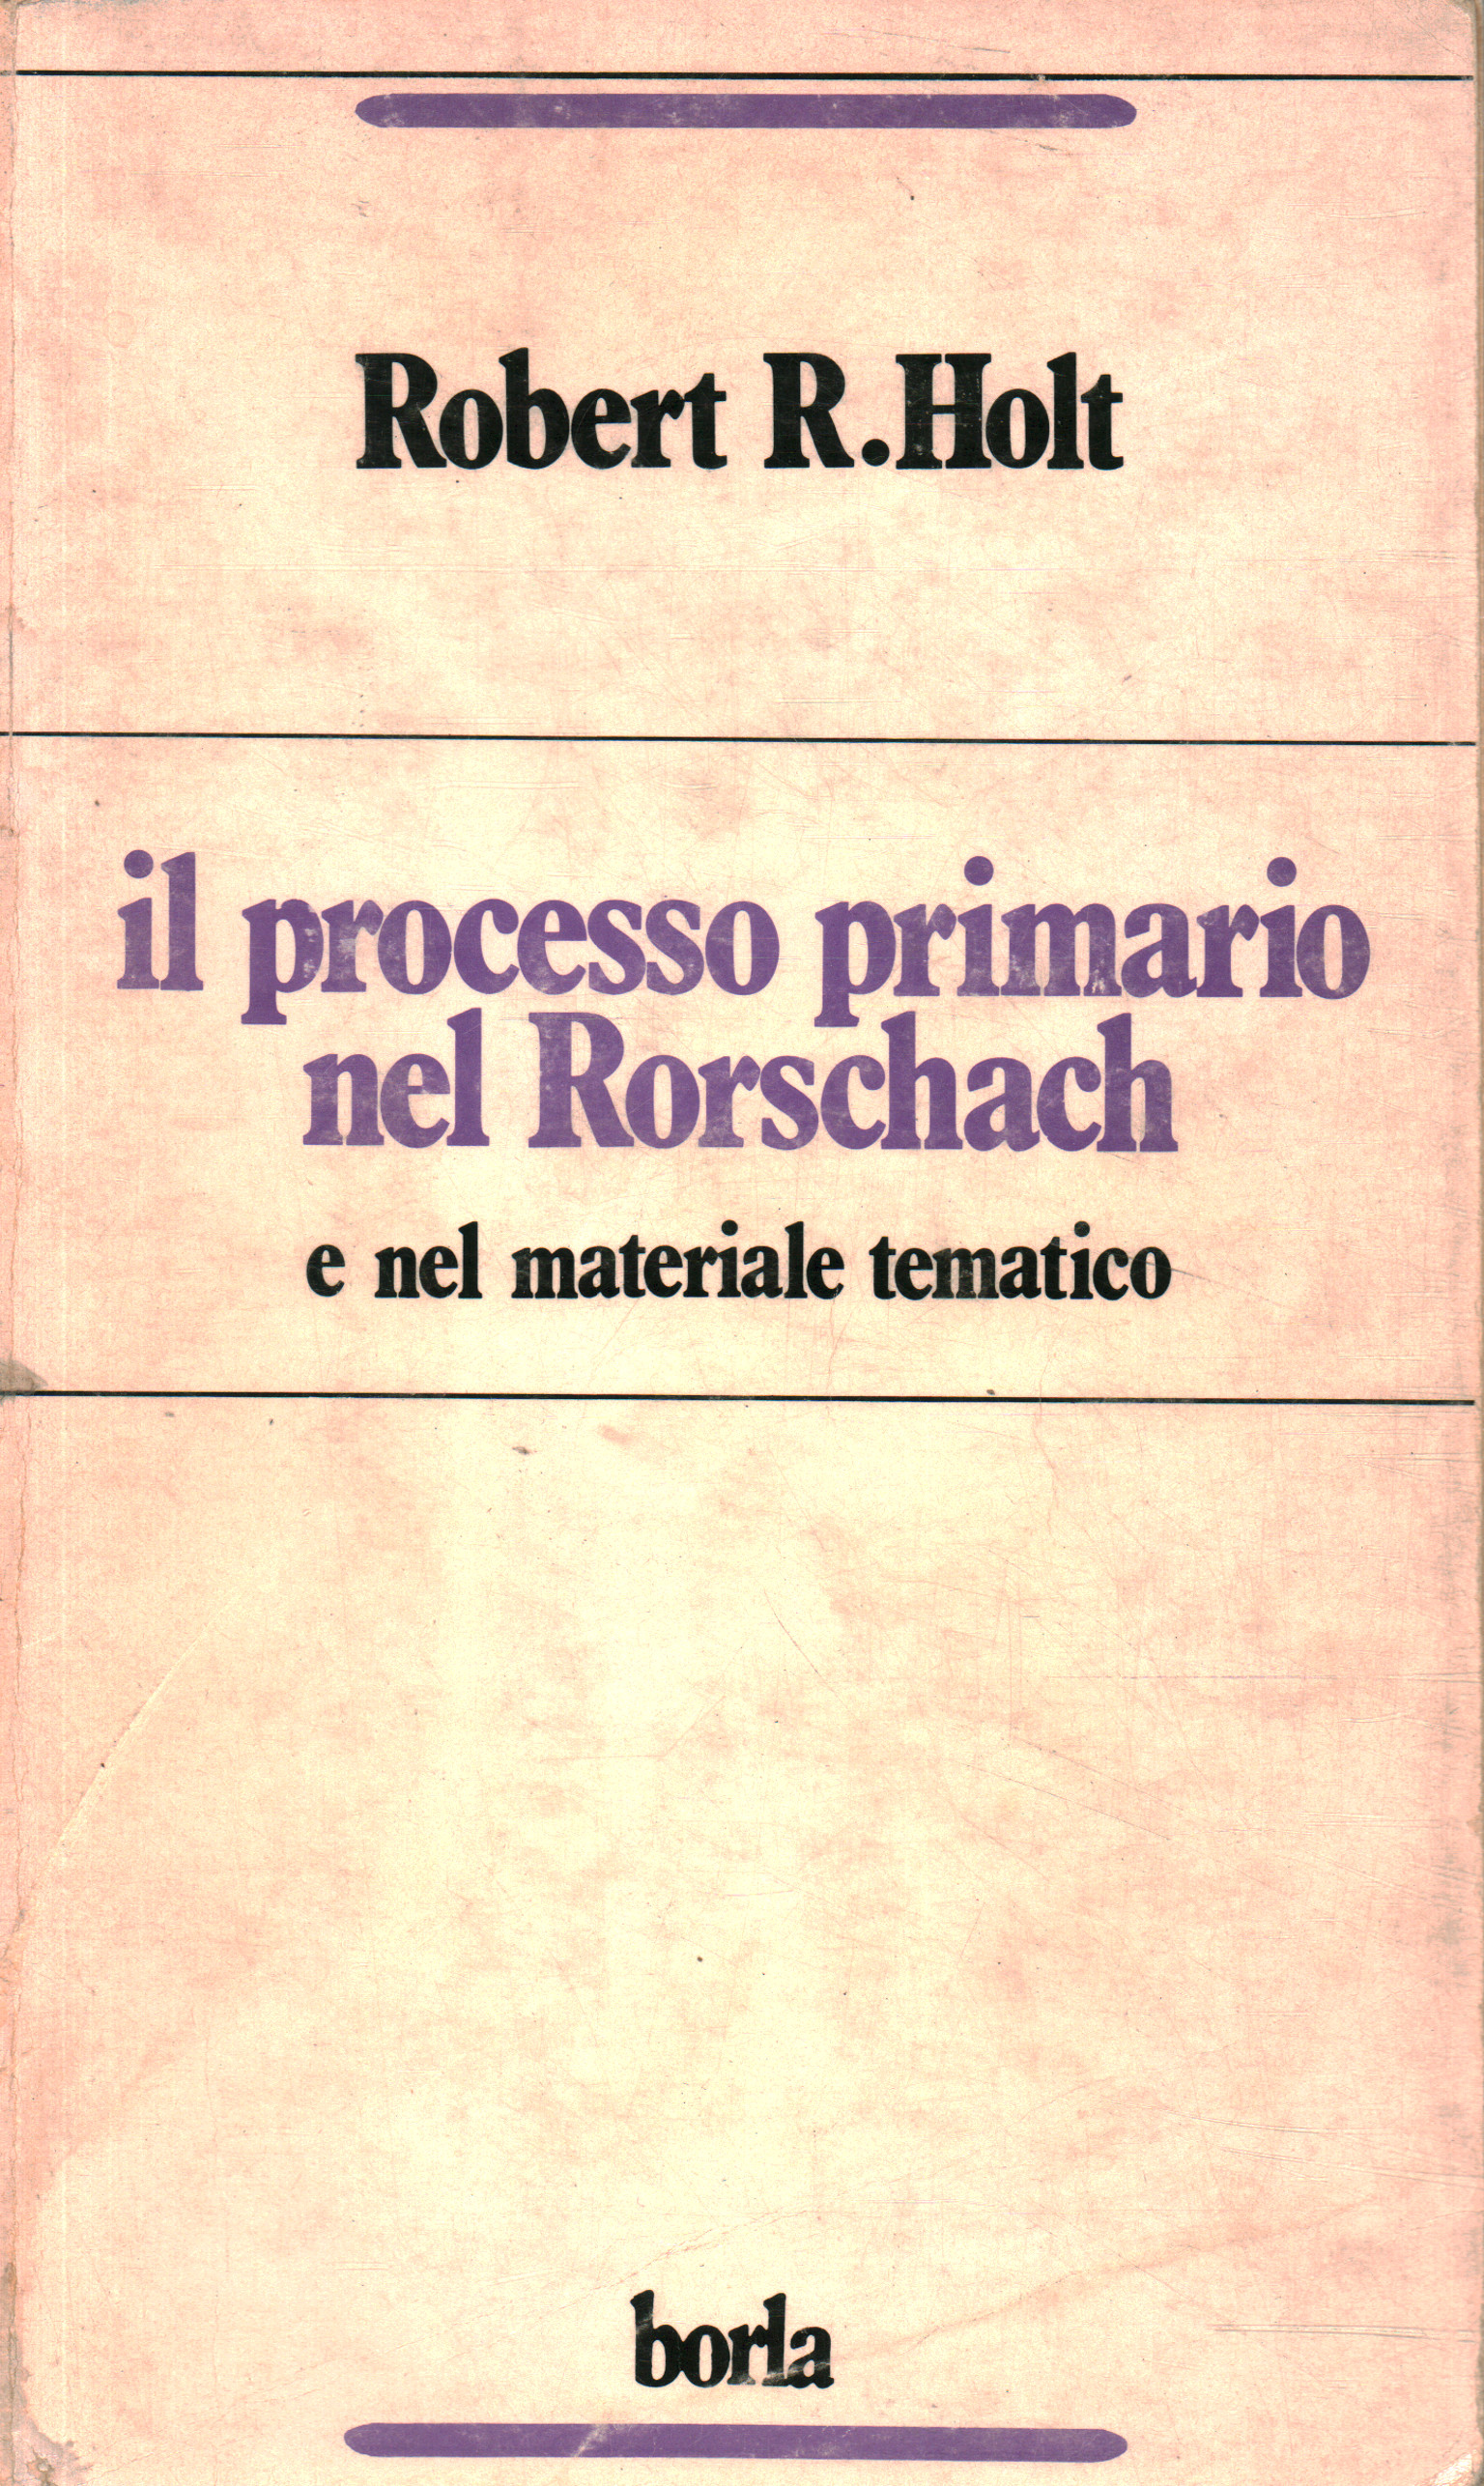 The primary trial in Rorschach, Robert R. Holt